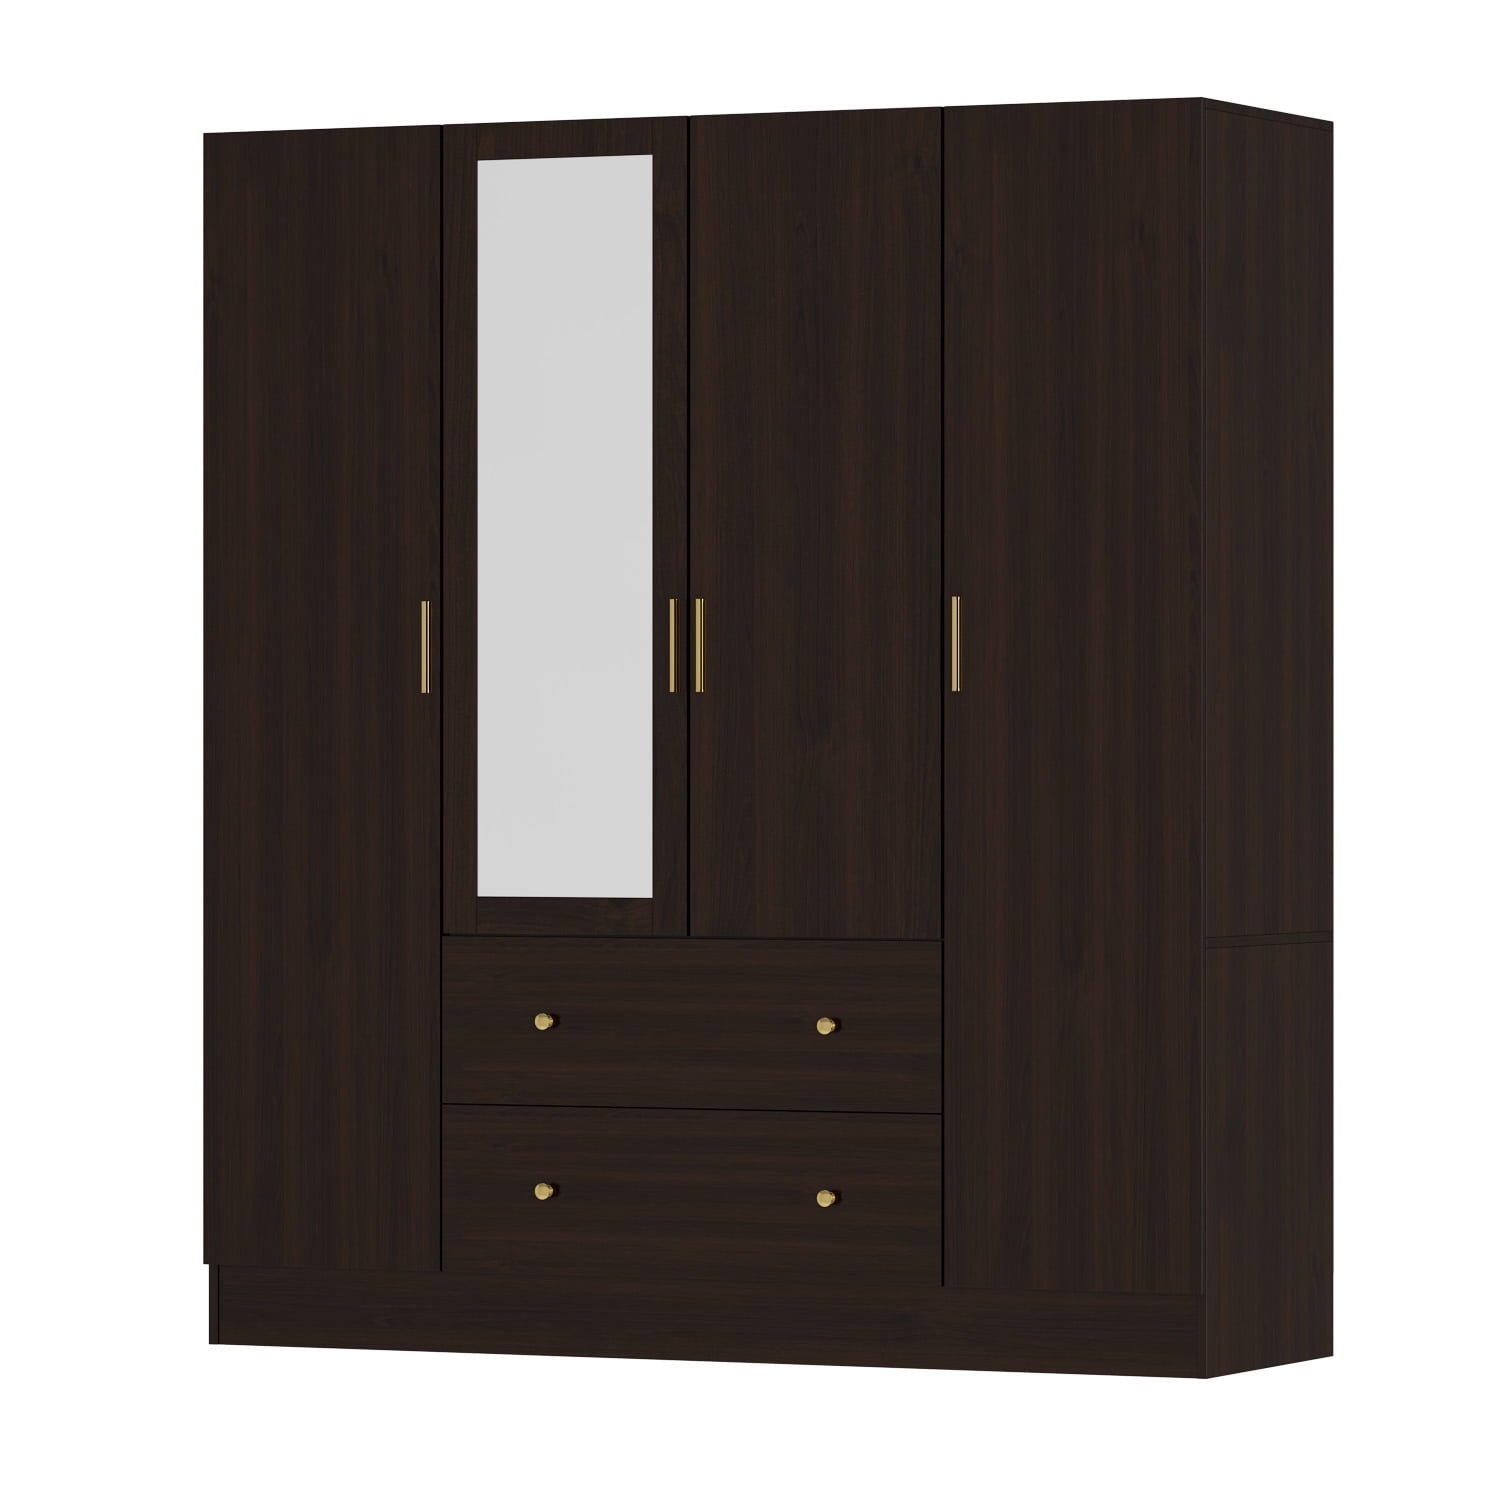 Timechee 4-Door Wardrobe Amoire Closet with Mirror, 2 Drawers and ...